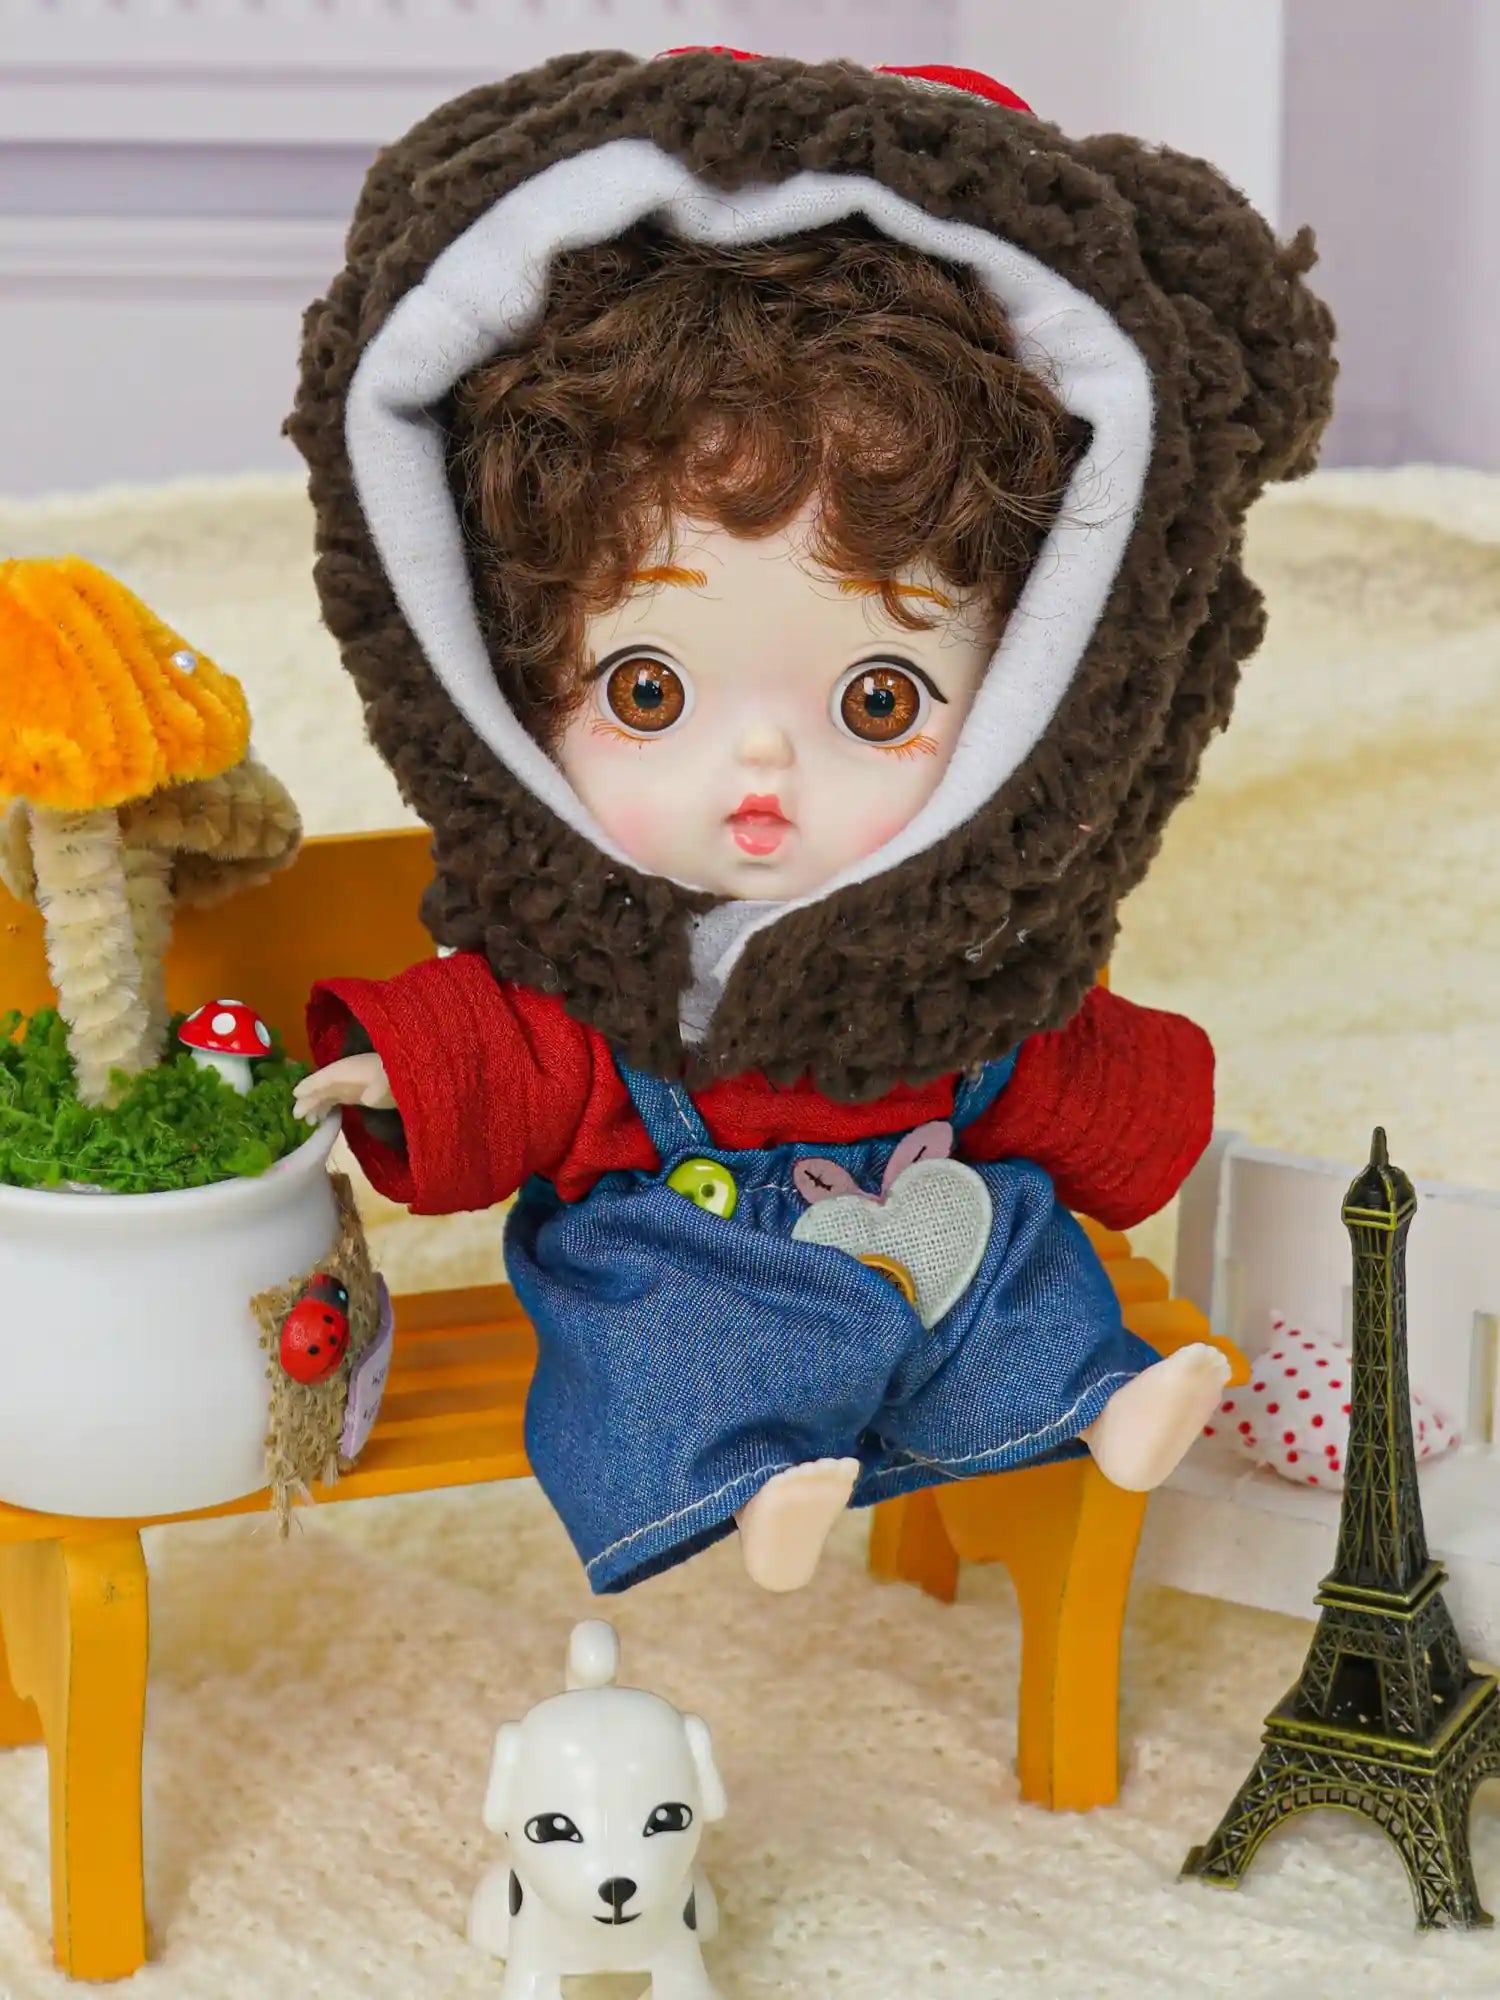 A ball-jointed doll sporting a hood with bear ears, sharing the stage with a miniature Eiffel Tower and a white puppy figure.